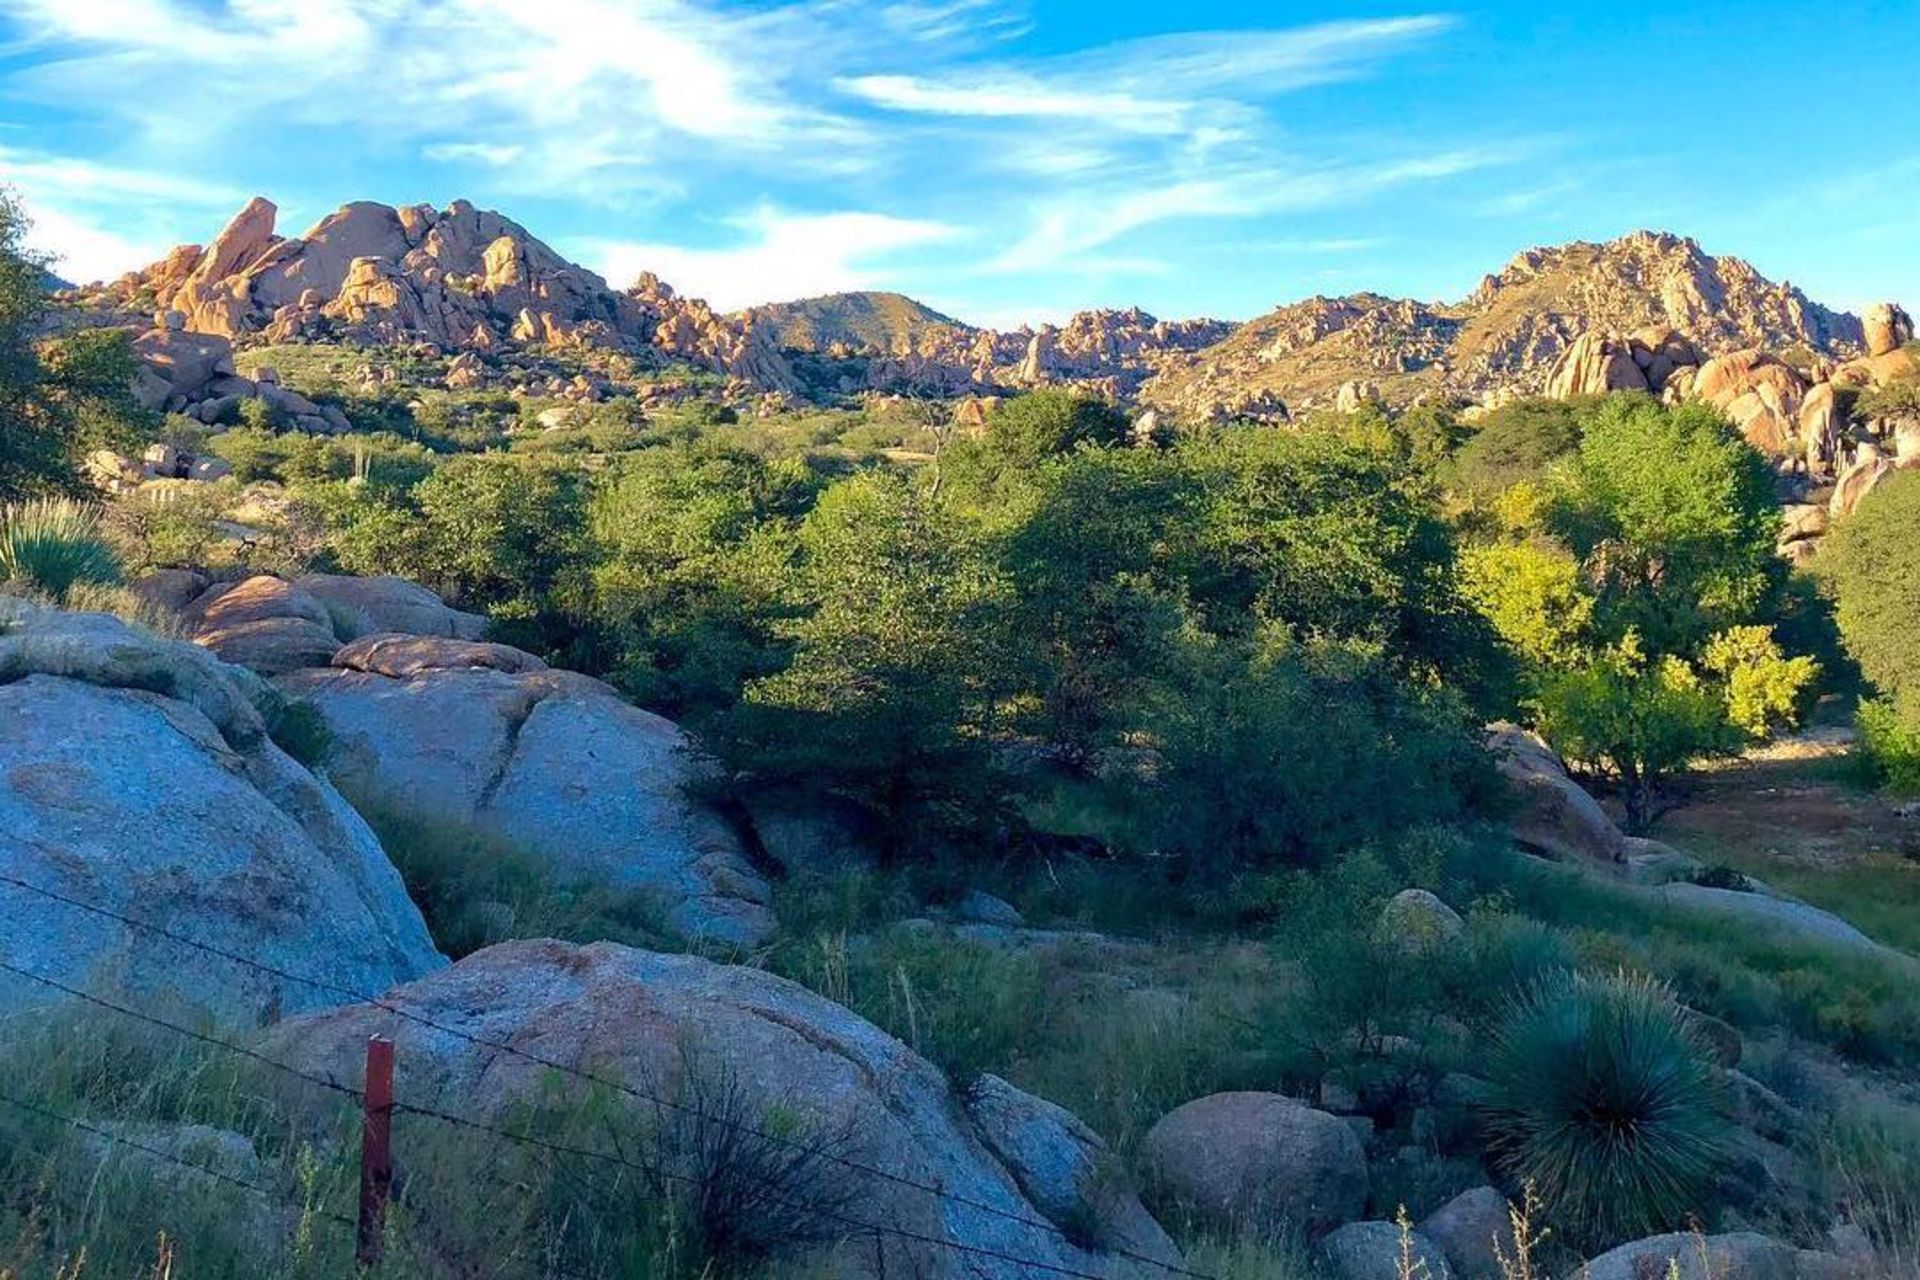 Explore Arizona Deserts & Mountains Views in Cochise County! - Image 9 of 9